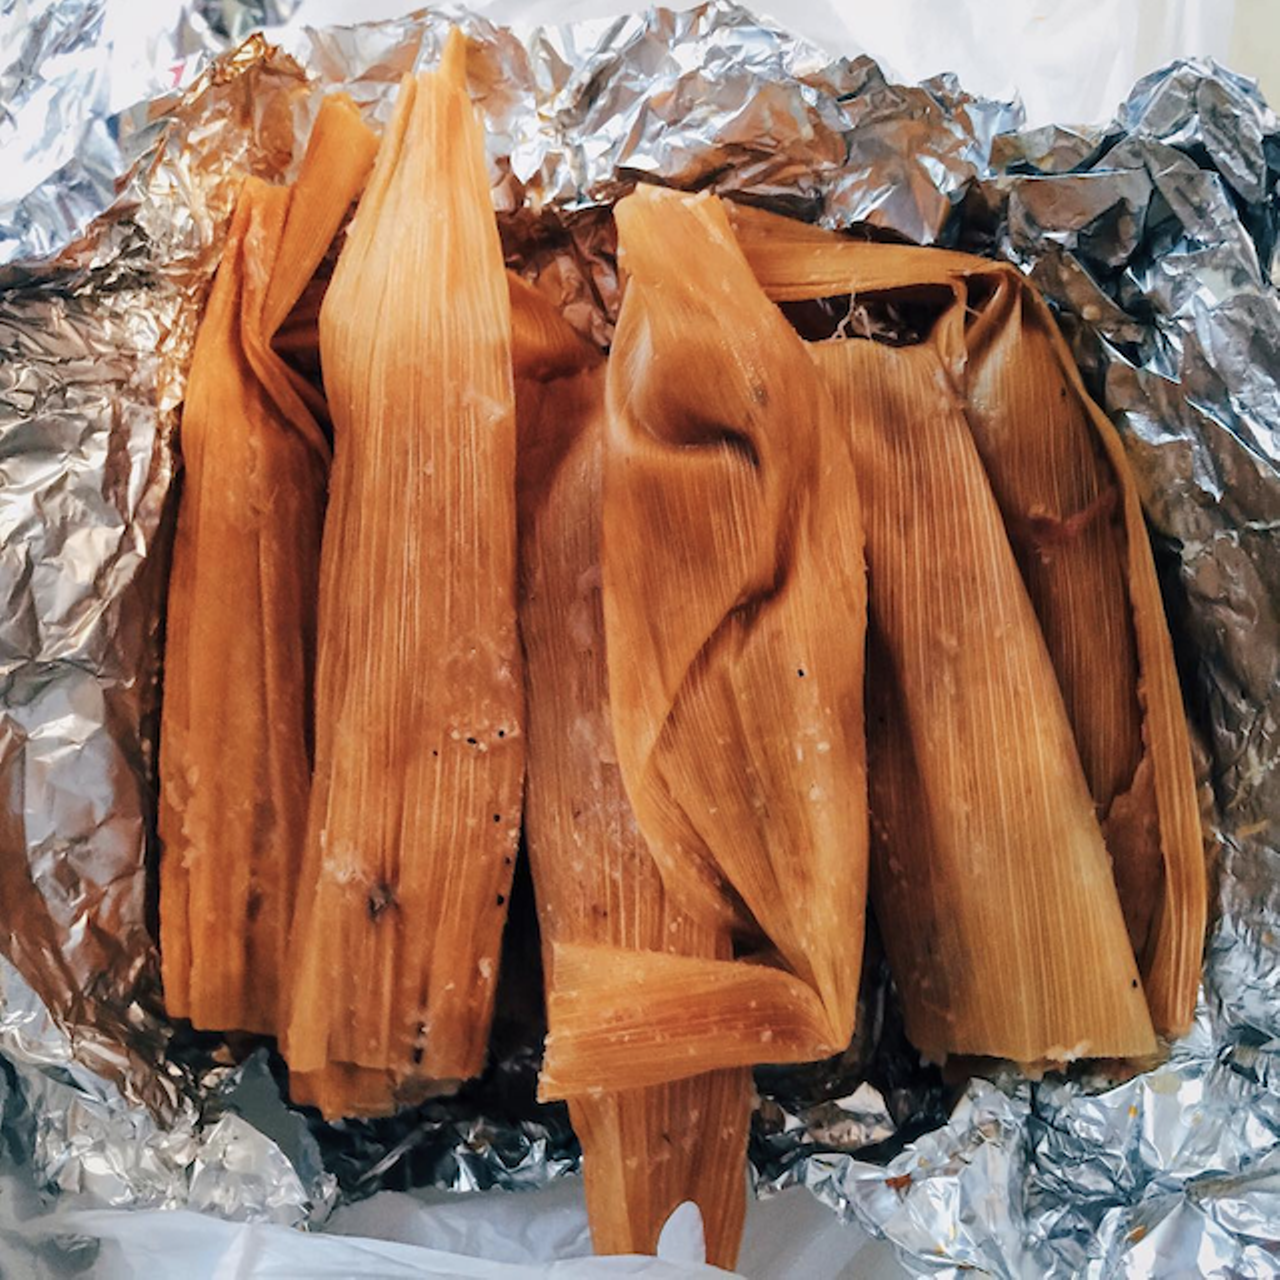 Tamales
Tamales are loved by foodies near and far, but how many cities can have multiple tamal-focused events? Countless numbers of vendors who sell tamales, either from their storefront, or even their own home? And that’s on top of all the families that make dozens of tamales that will last them a few weeks – though to be fair, that’s a Latino thing. But overall, that’s San Antonio for you.
Photo via Instagram / roninreckless